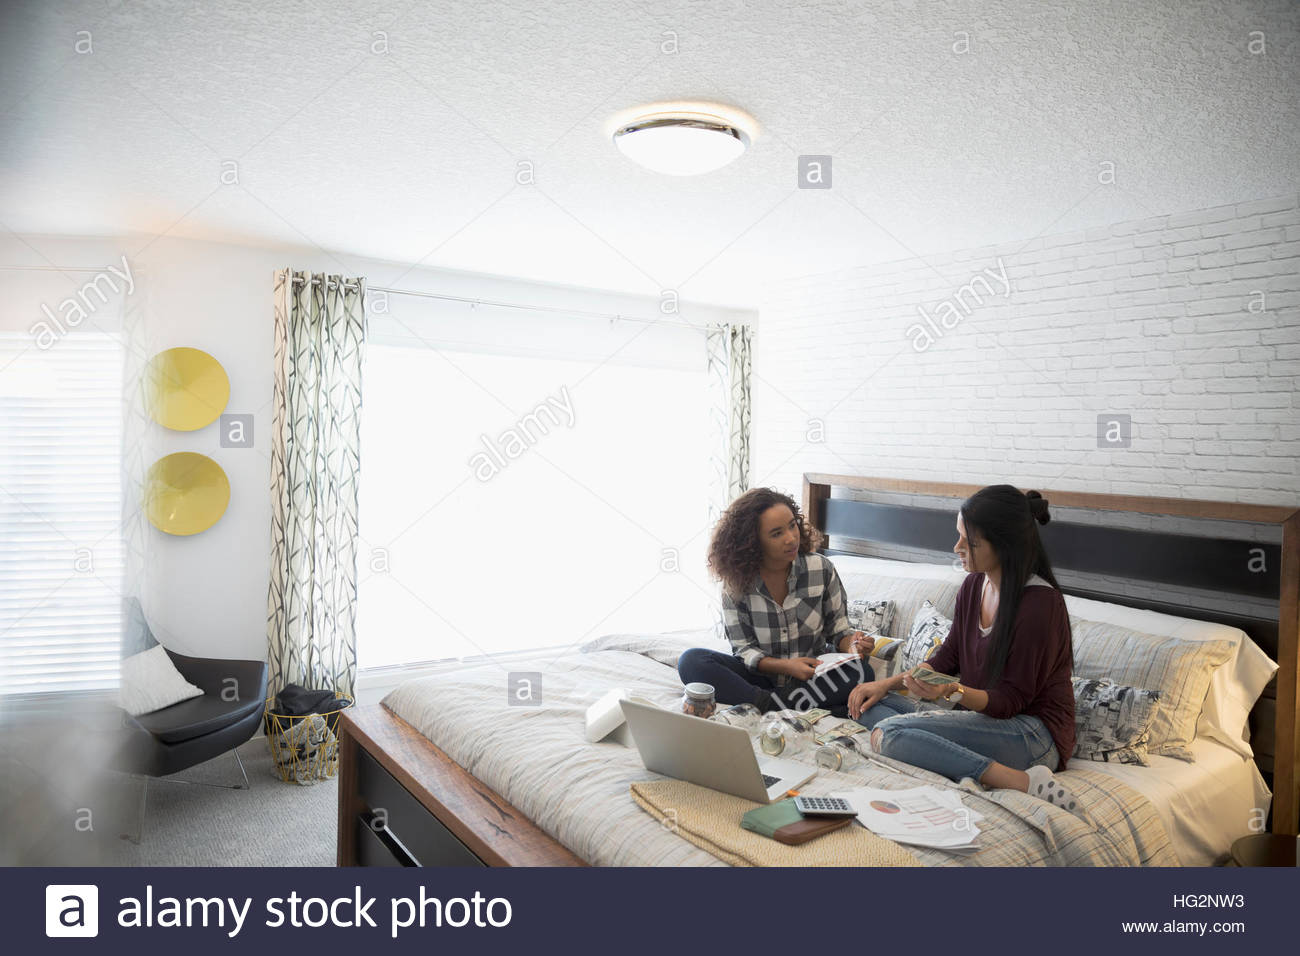 Mother with laptop teaching daughter personal finance management in bedroom Stock Photo